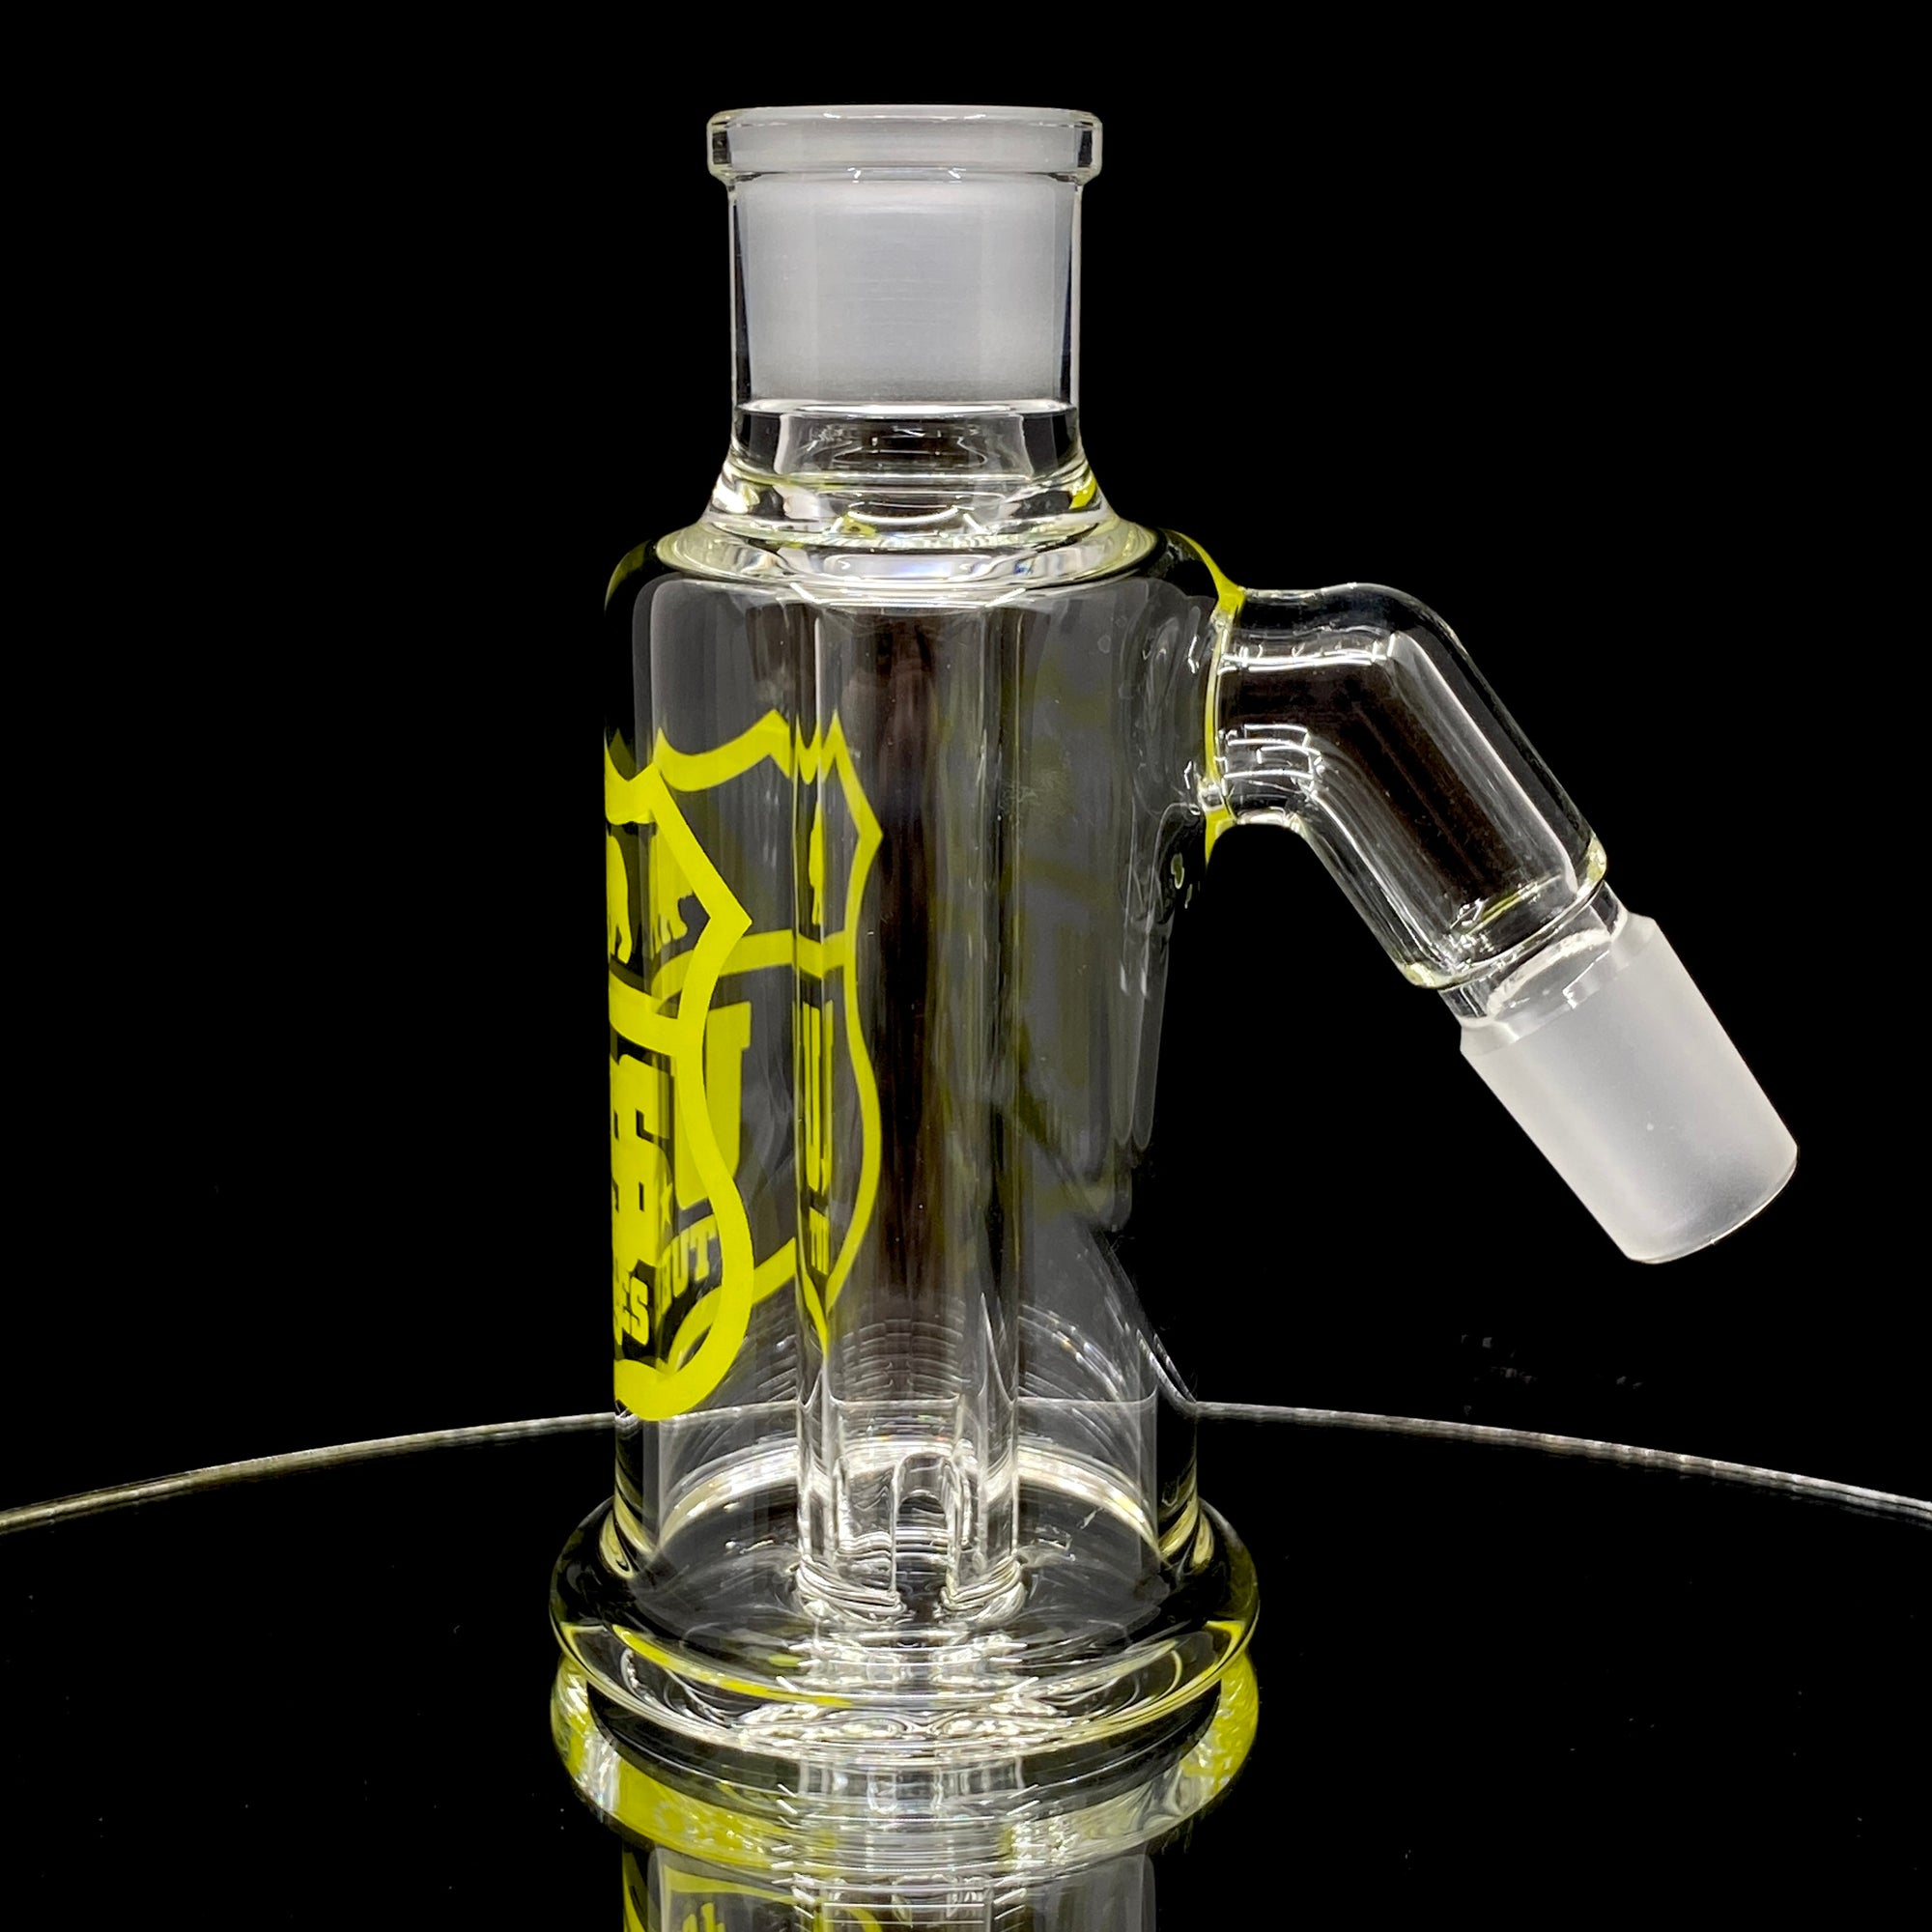 US Tubes Ash catcher, 19mm Joint, 45 Degree